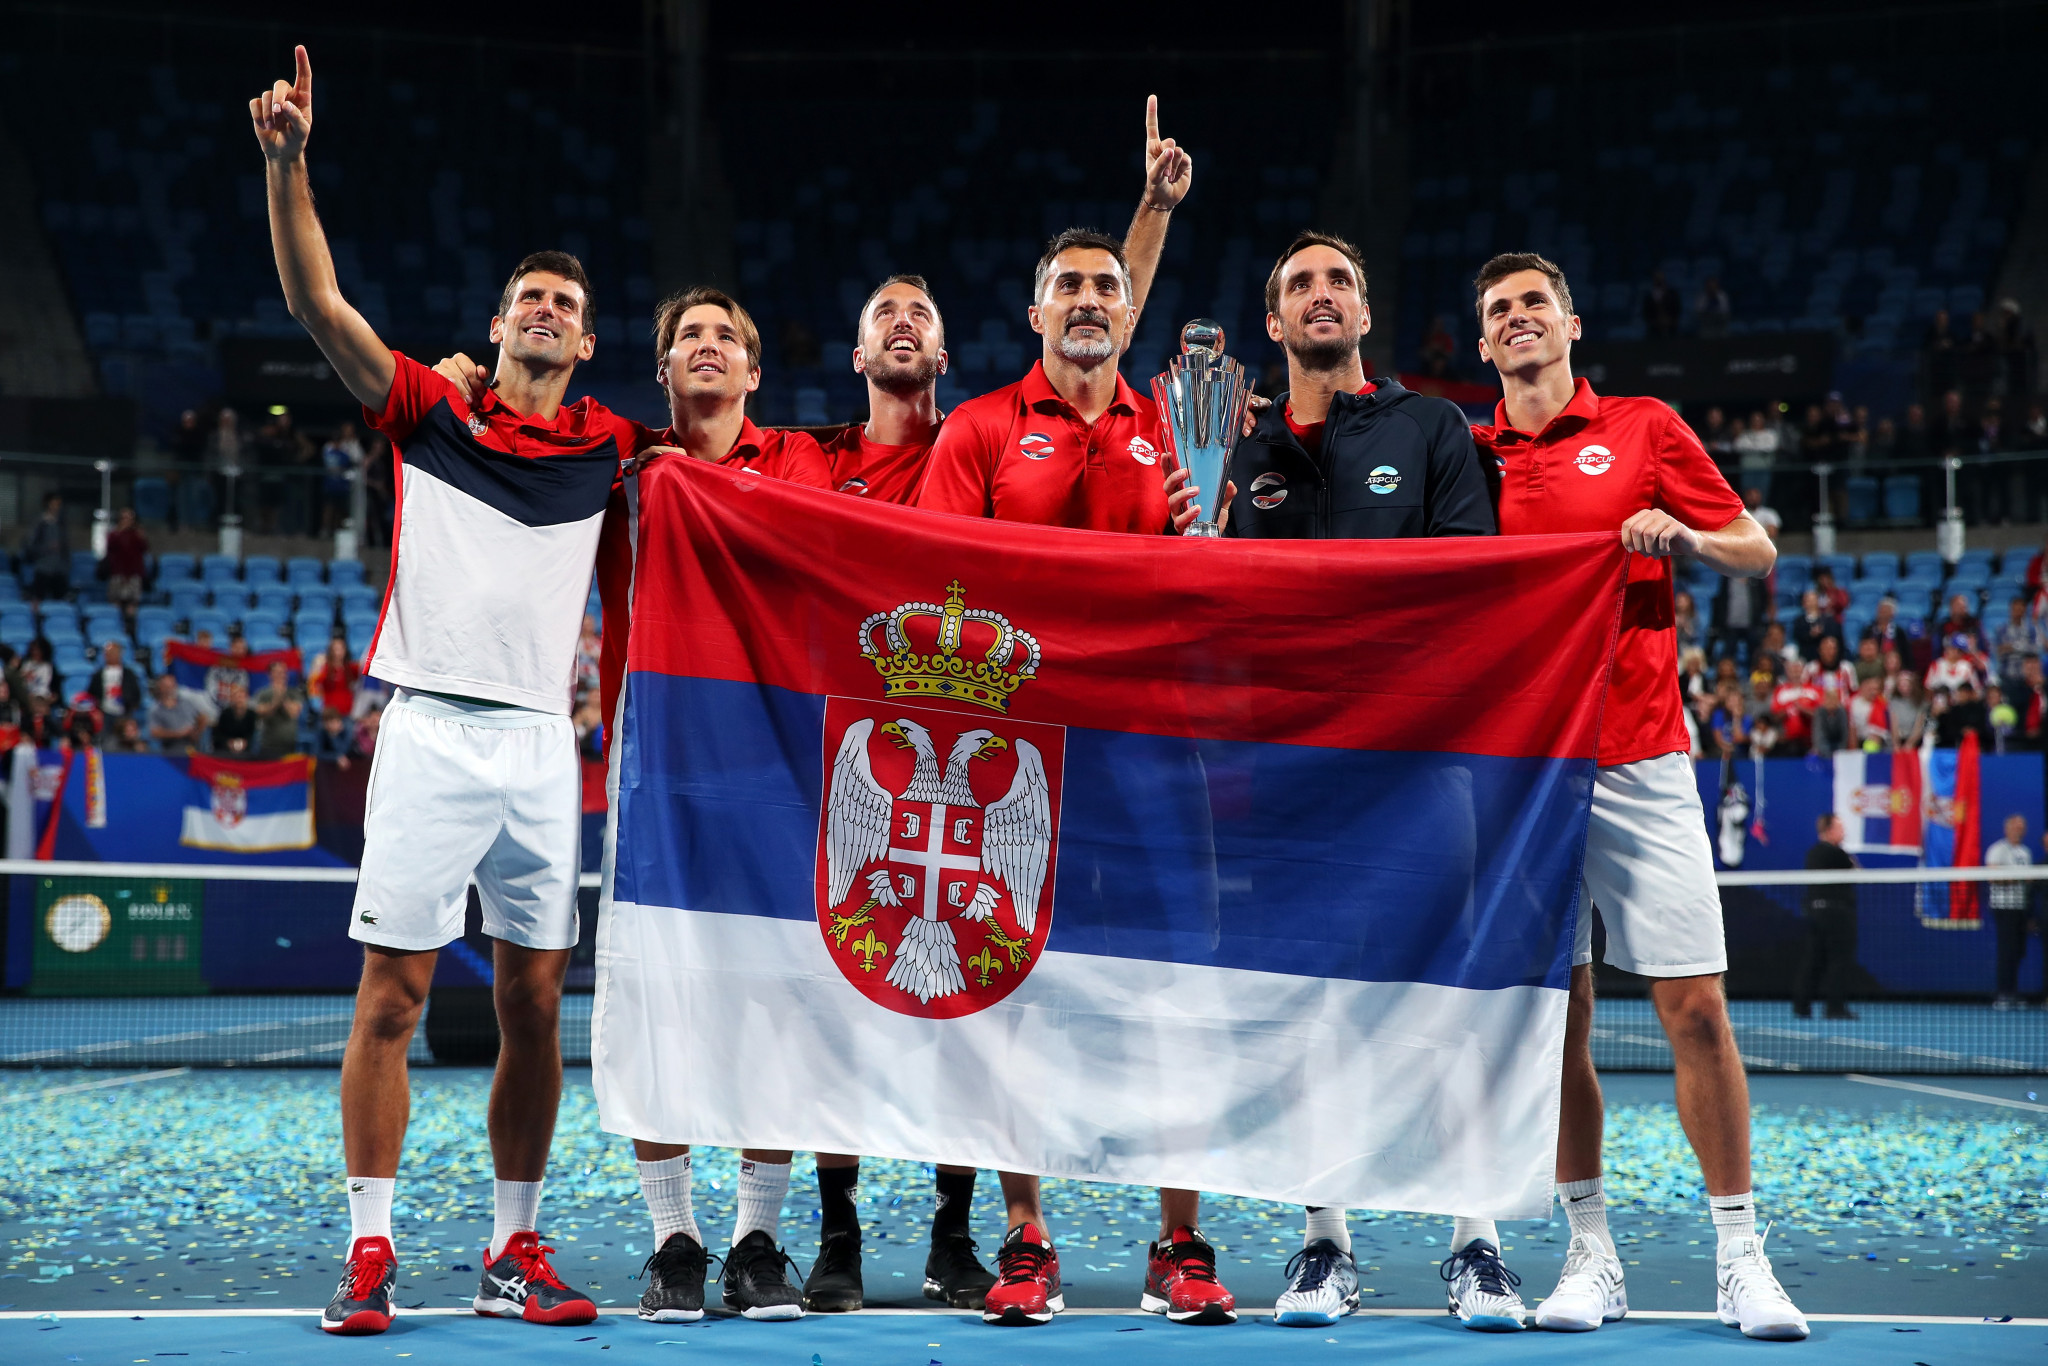 Serbia will be looking to defend the ATP Cup title after winning the event last year ©Getty Images